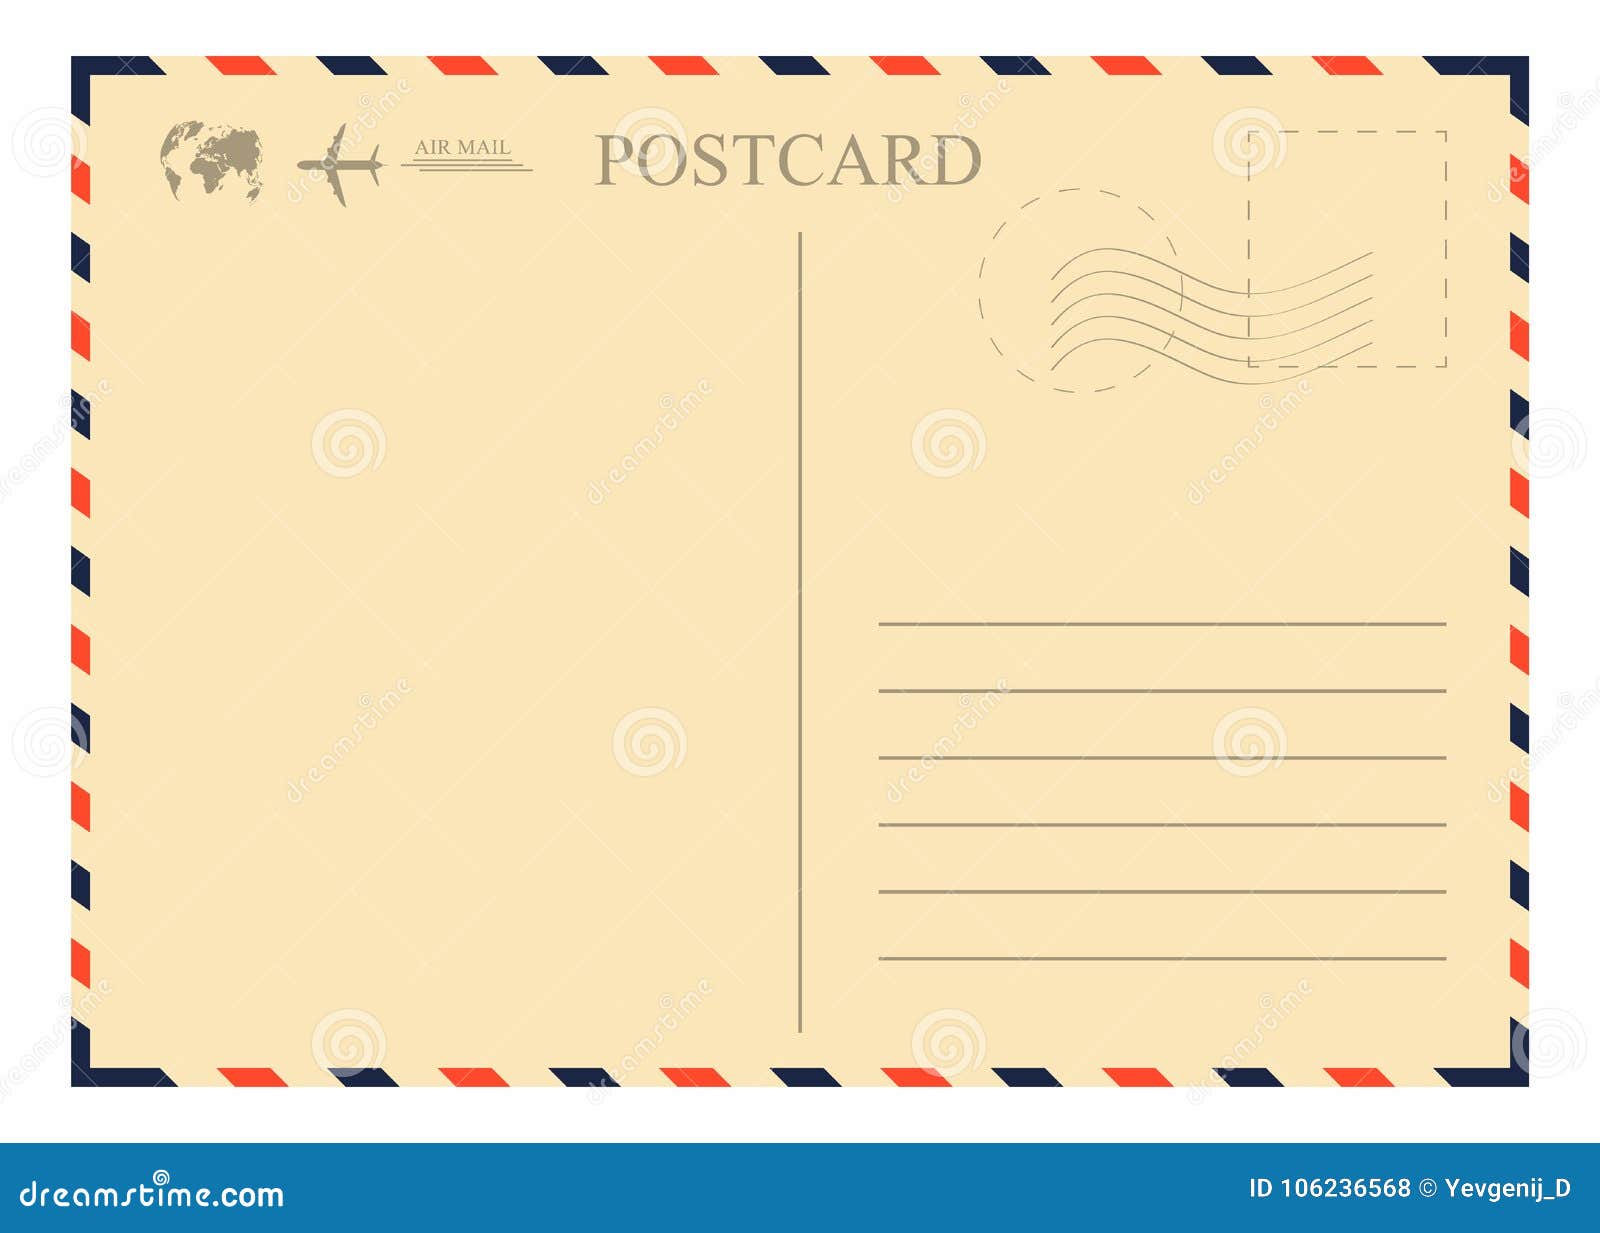 vintage postcard template. retro airmail envelope with stamp, airplane and globe